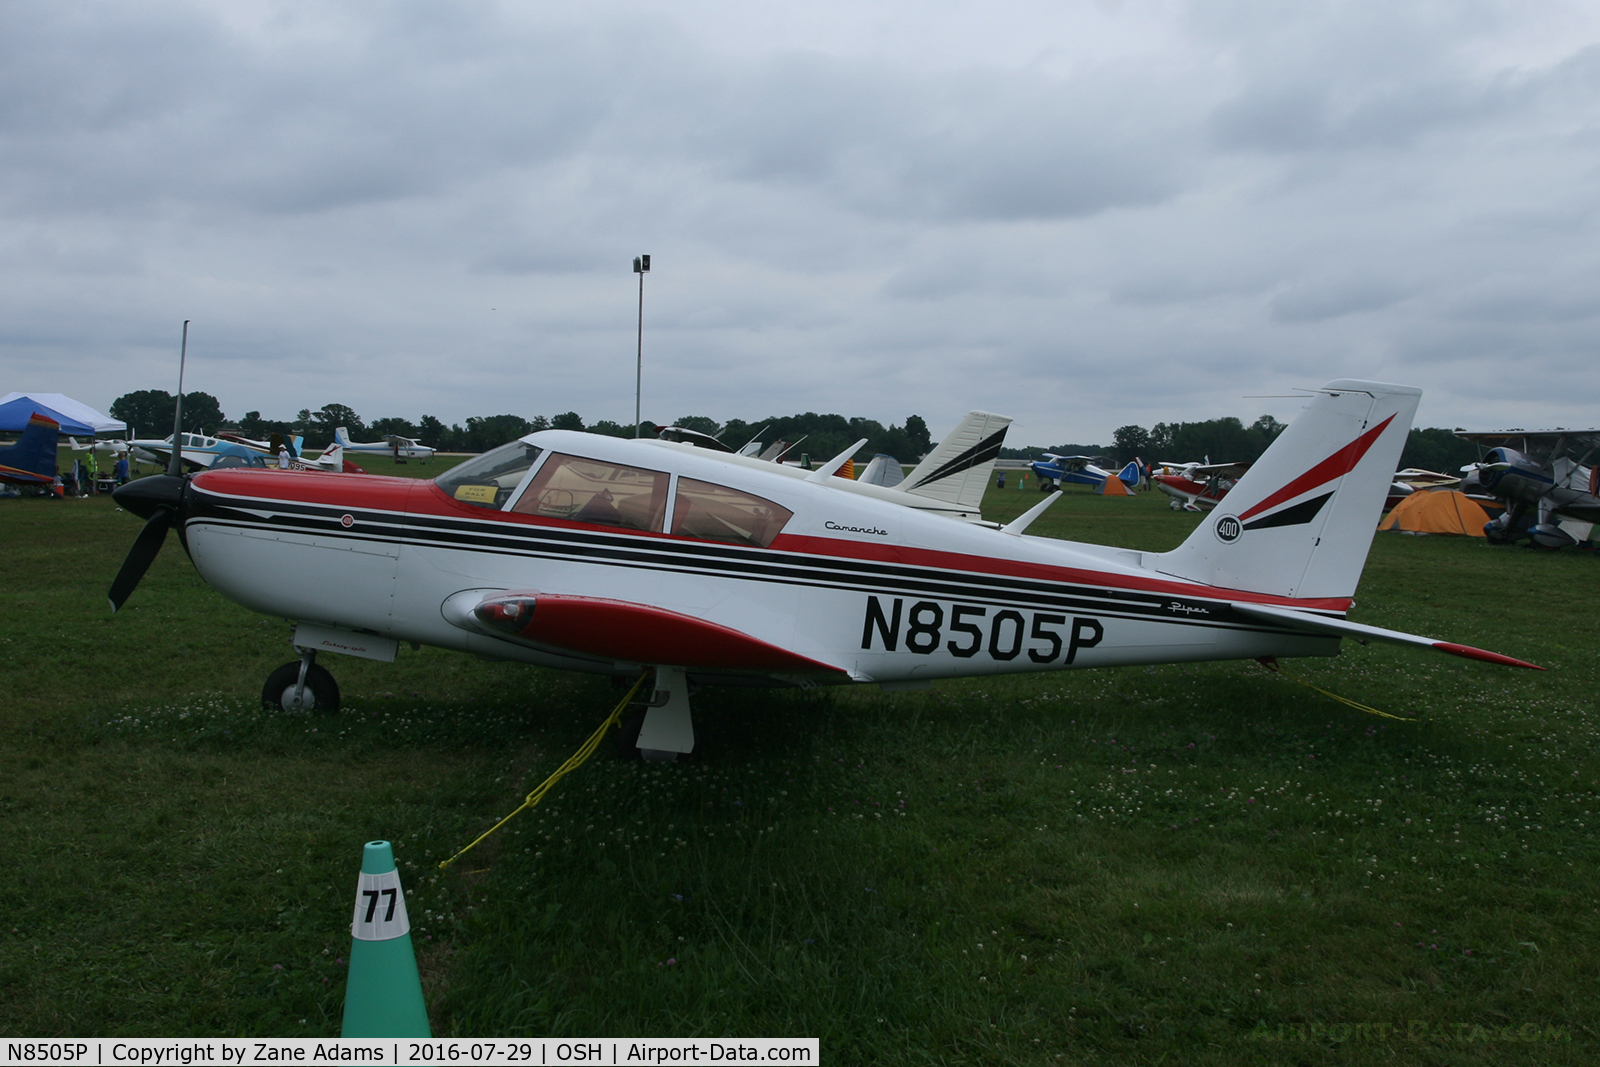 N8505P, 1964 Piper PA-24-400 Comanche 400 C/N 26-85, At the 2016 EAA AirVenture - Oshkosh, Wisconsin